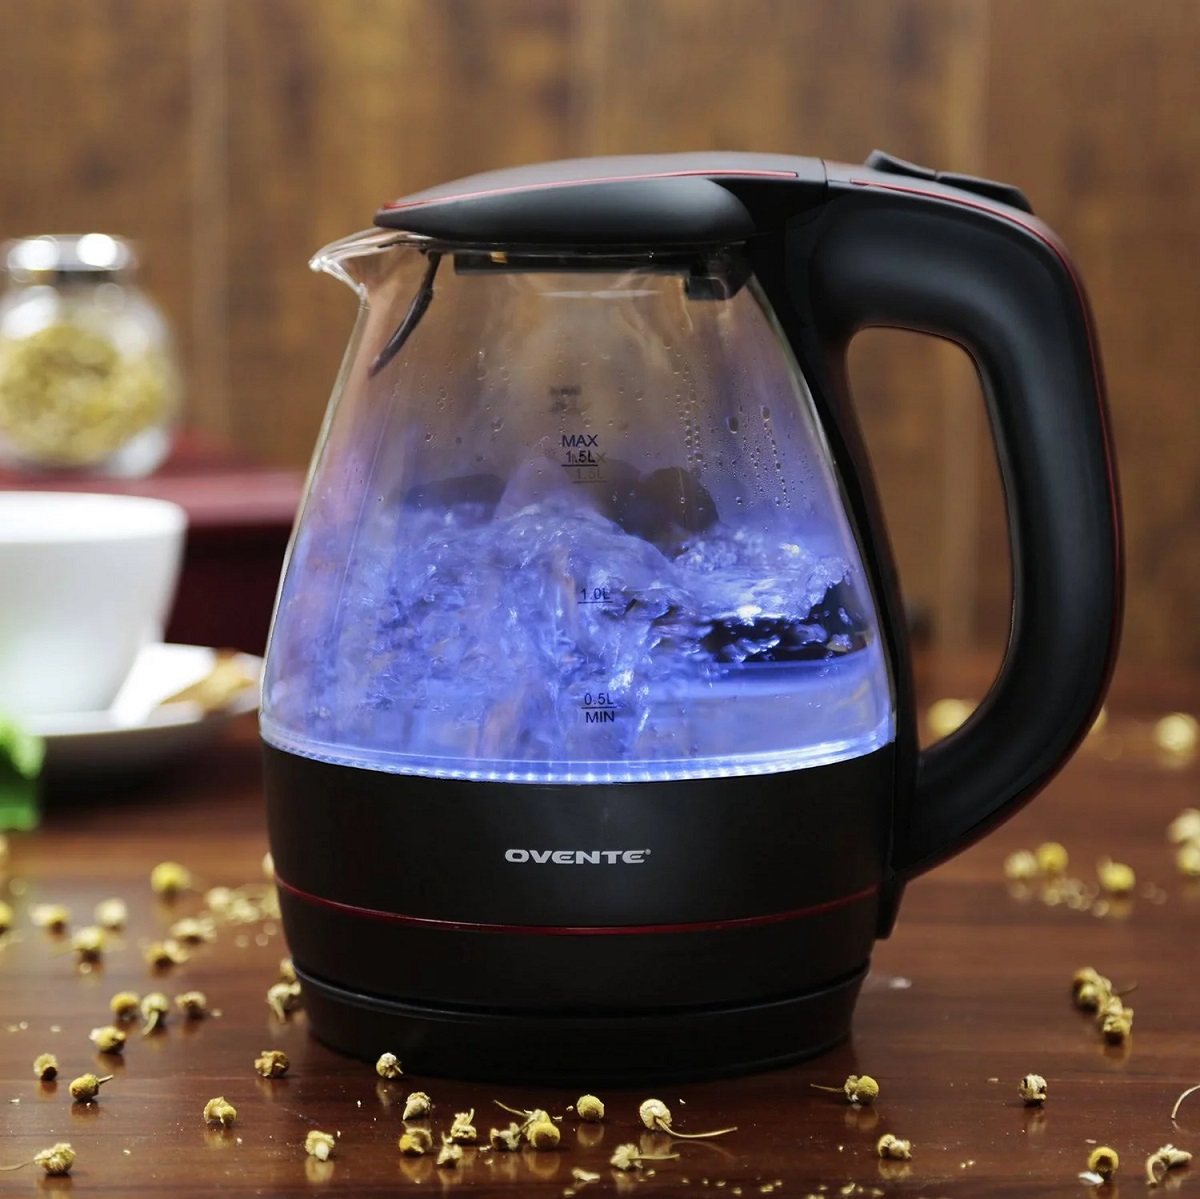 How To Use The Ovente Electric Kettle